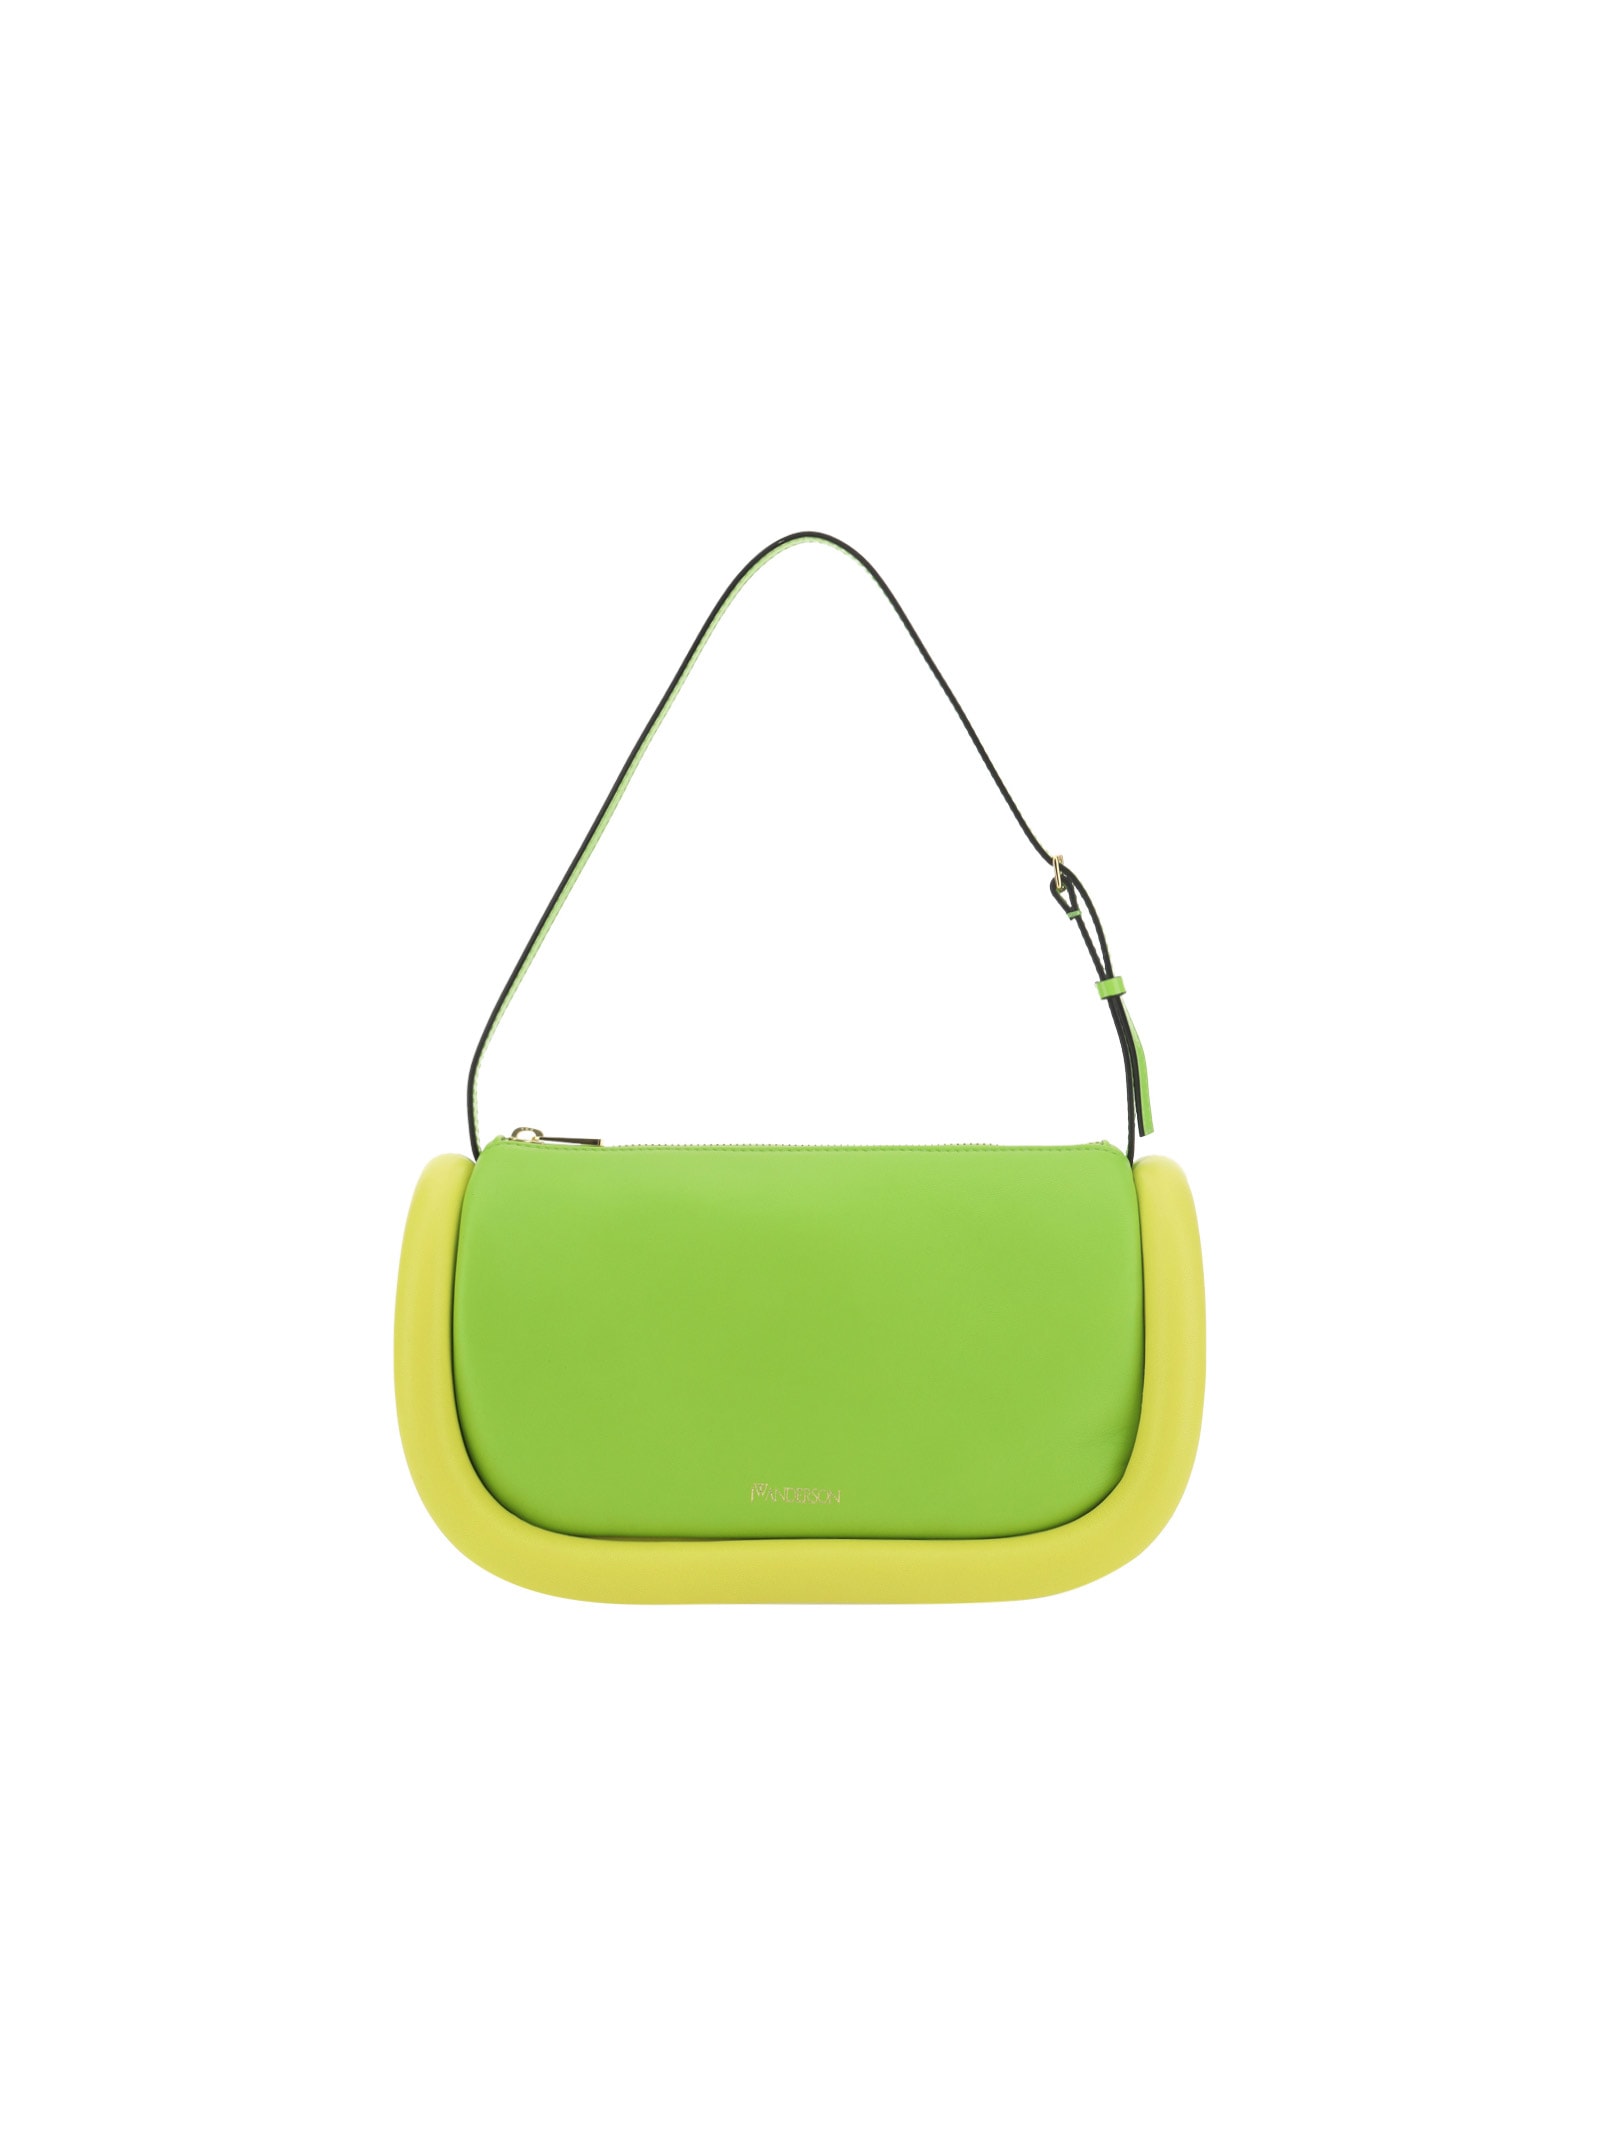 Jw Anderson Bumper-15 Shoulder Bag In Lime Green/yellow